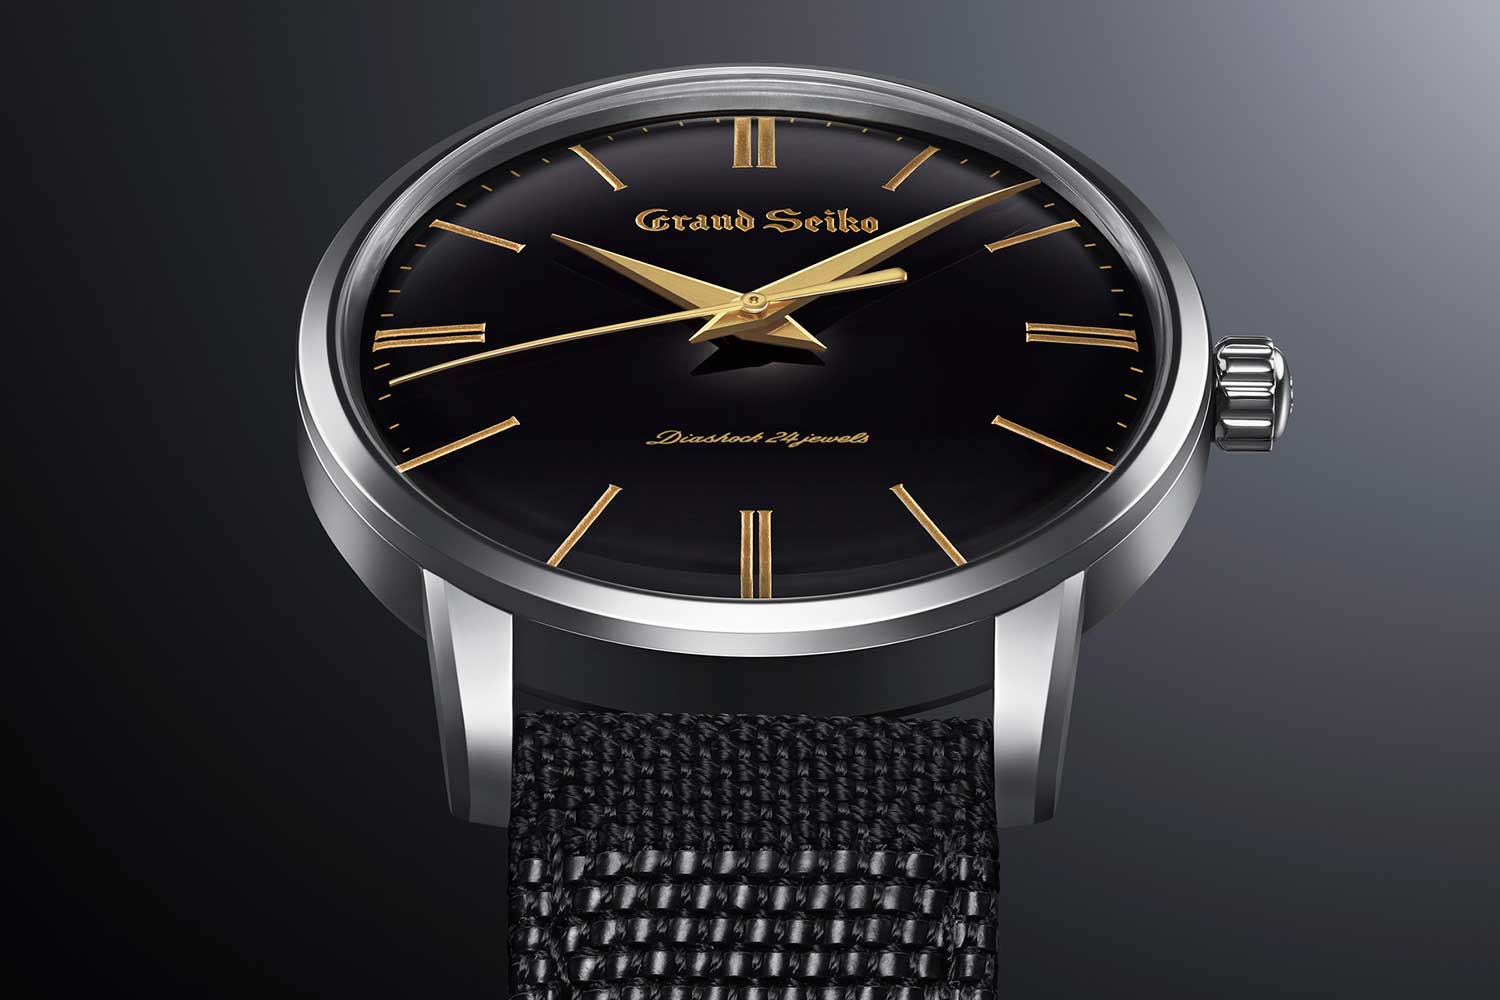 Introducing the Grand Seiko Elegance Collection SBGW295 in T - Revolution